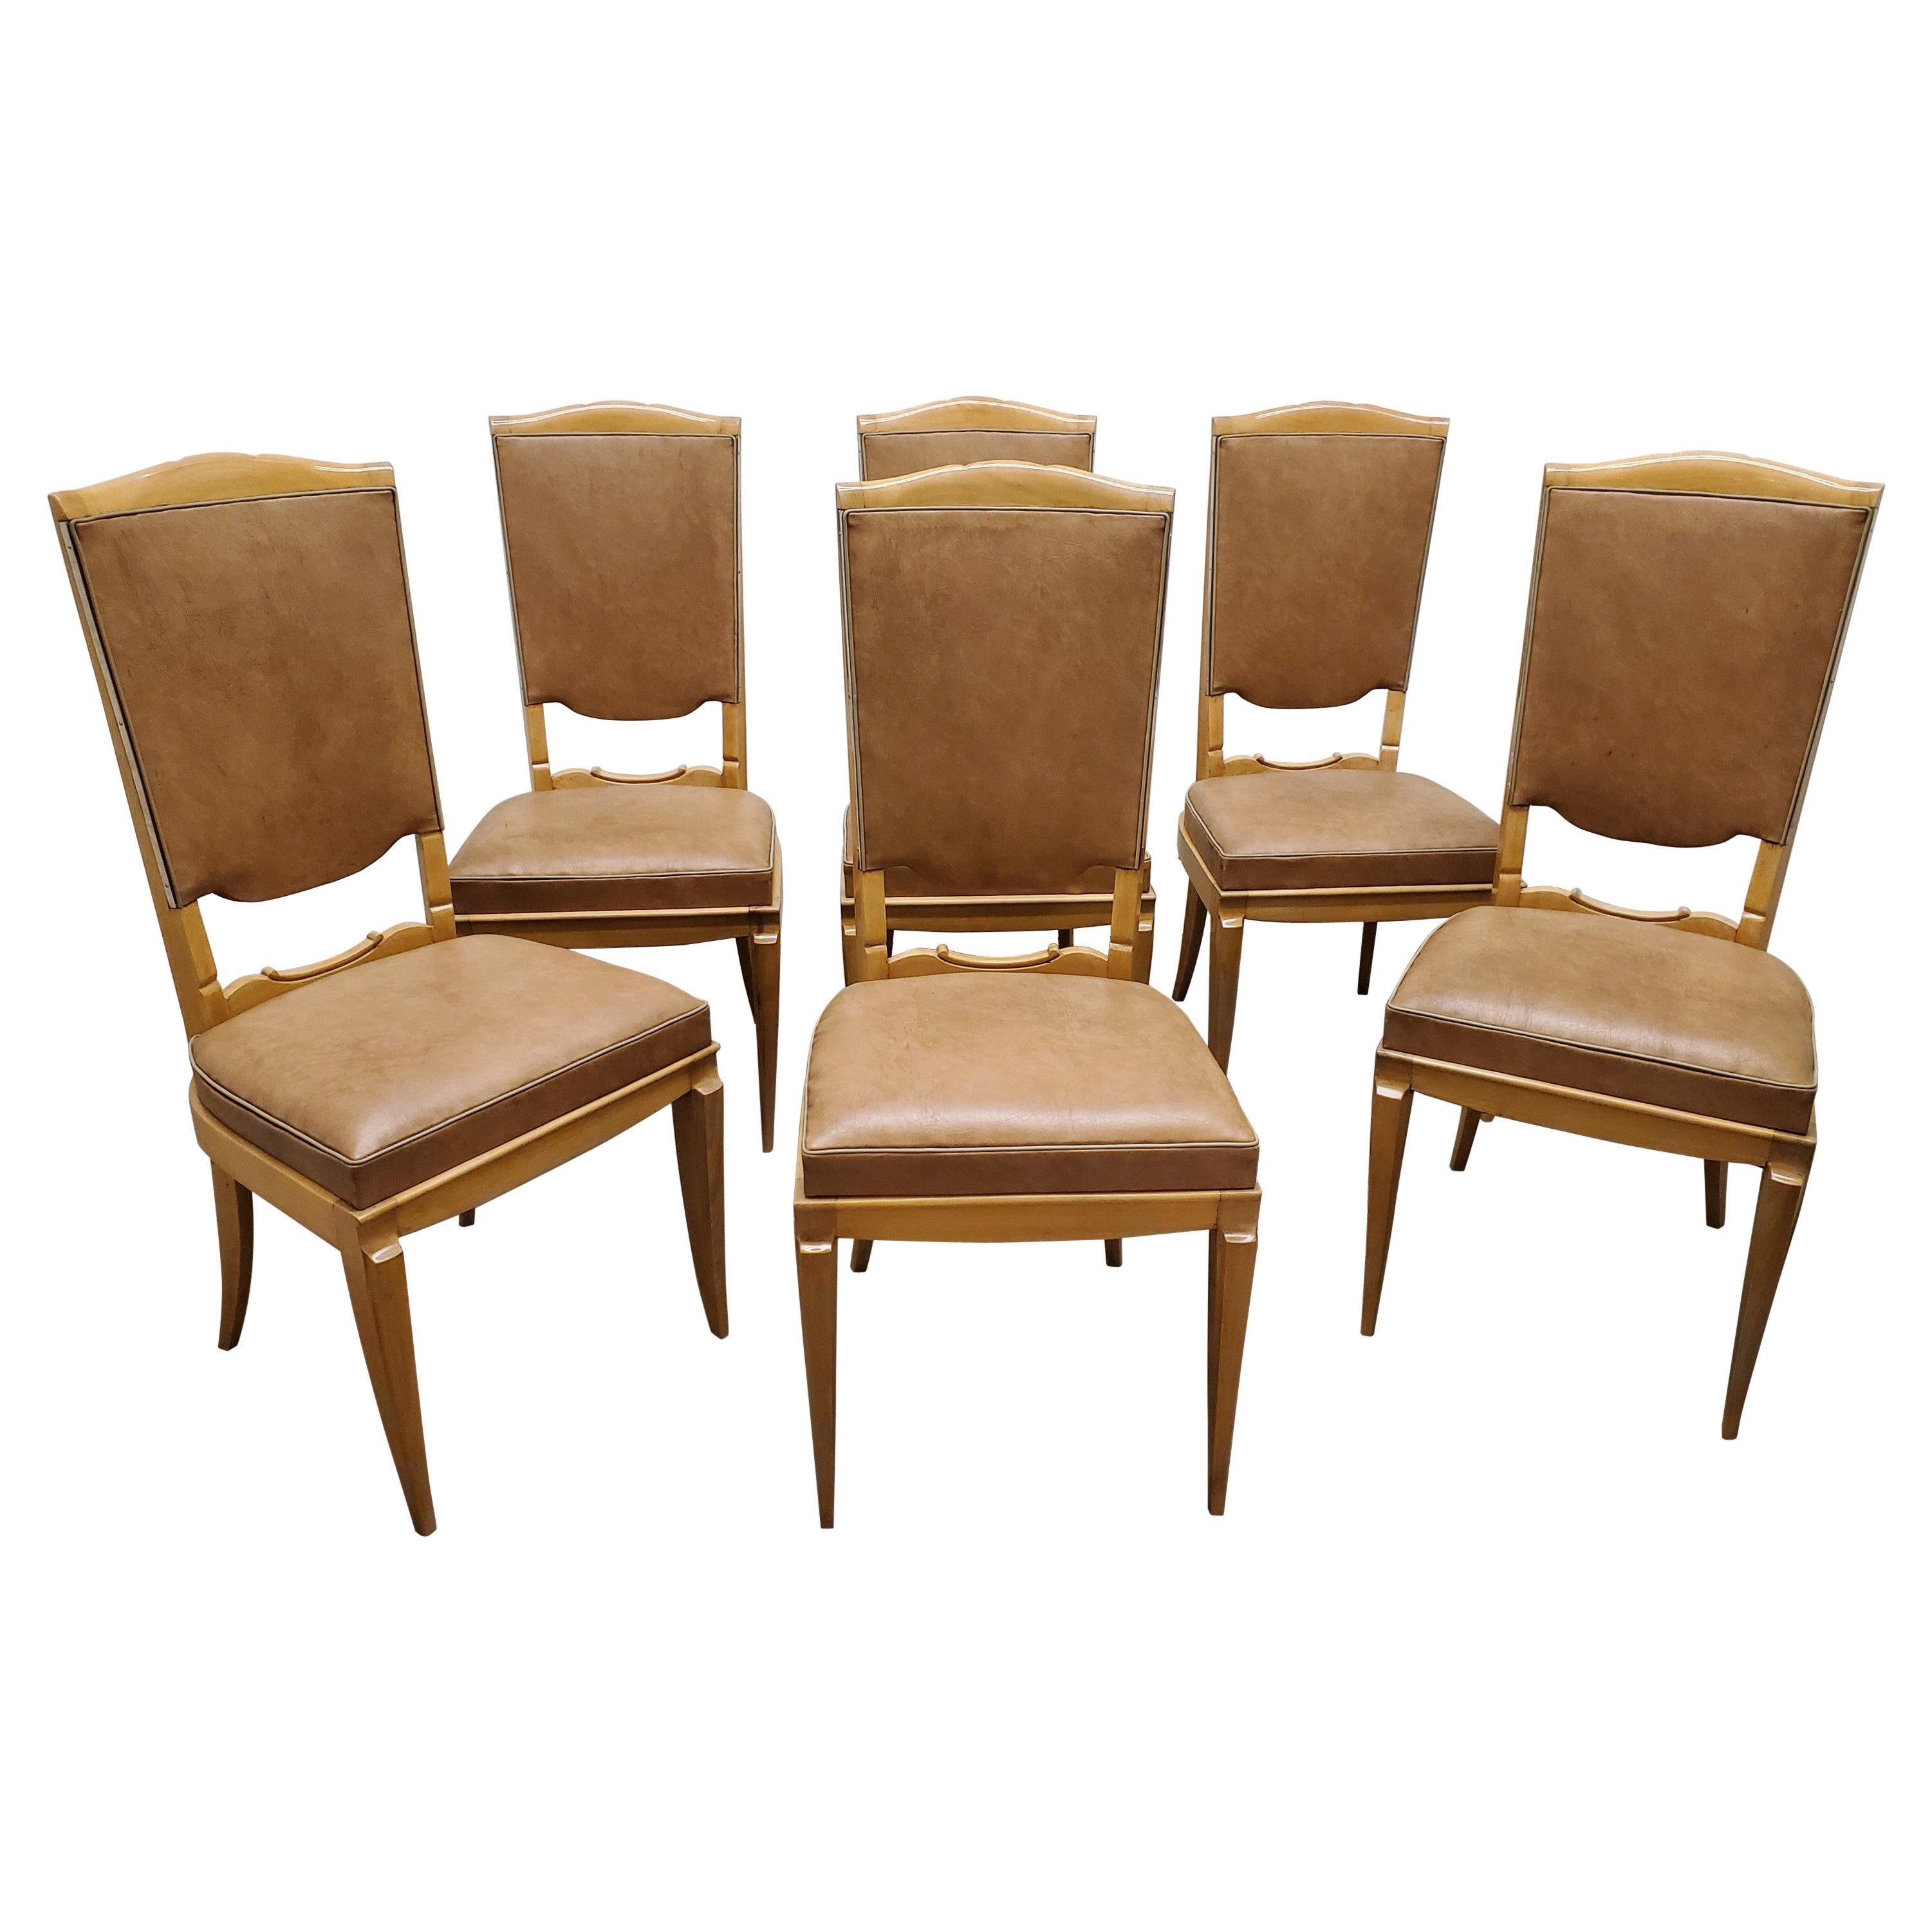 Set of Six 1940's Dining Chairs in Beech w/ Nickel Detail, Attrib to Rene Prou For Sale